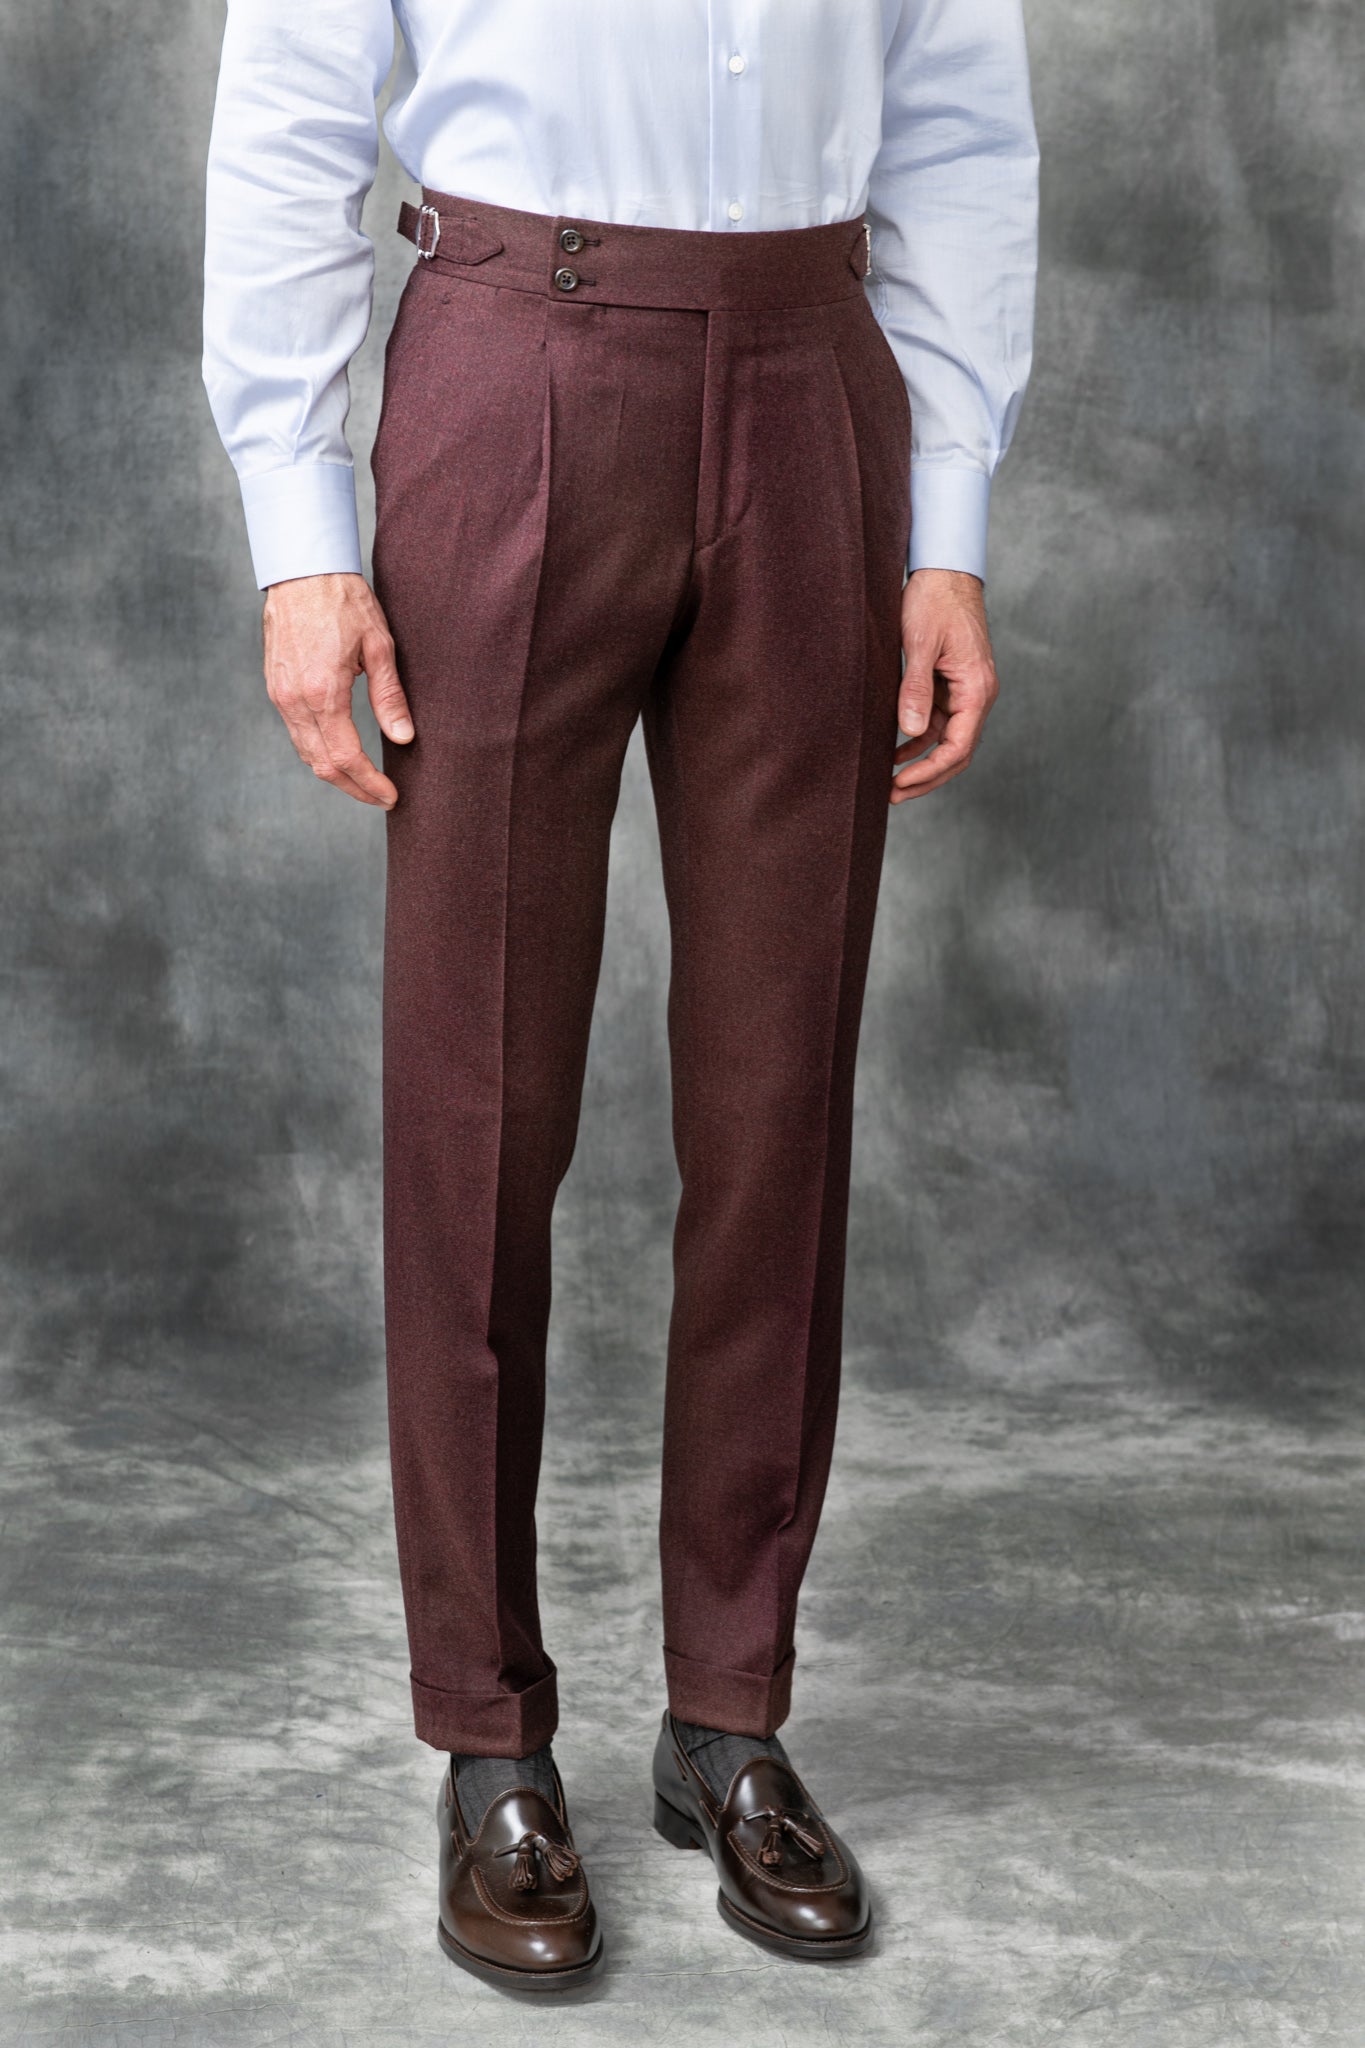 Bordeaux Flannel Trousers "Soragna Capsule Collection" – Made in Italy